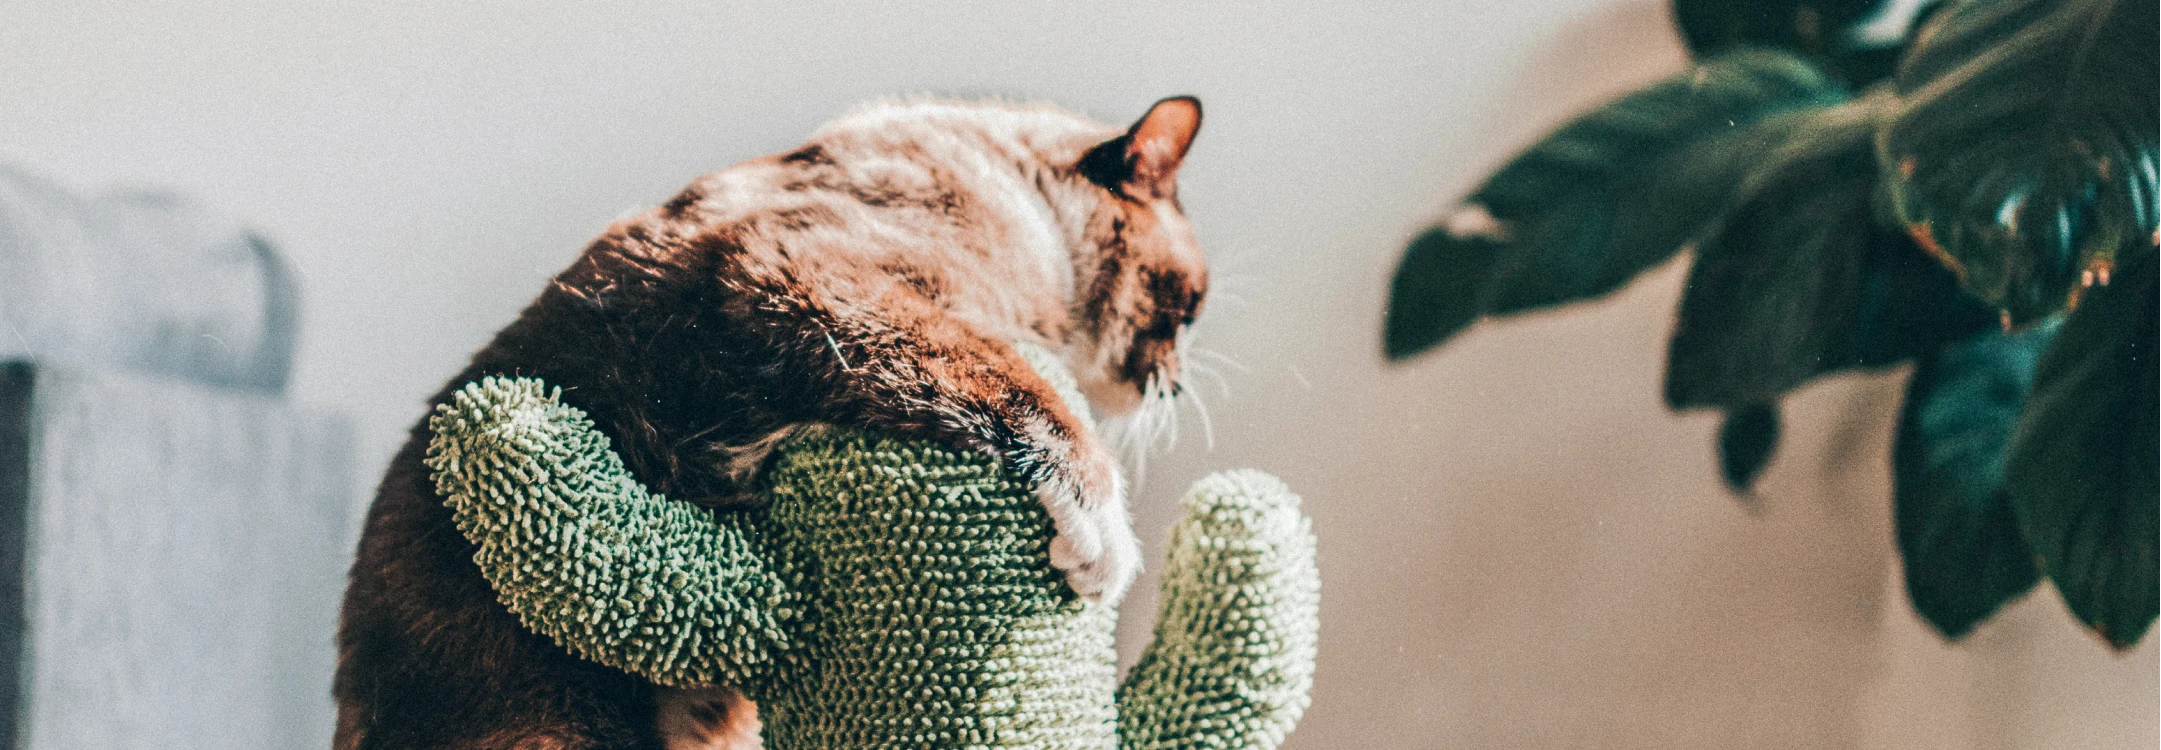 photo of cat climbing onto an imitation cactus cat scratcher with fiddle leaf fig tree in the background